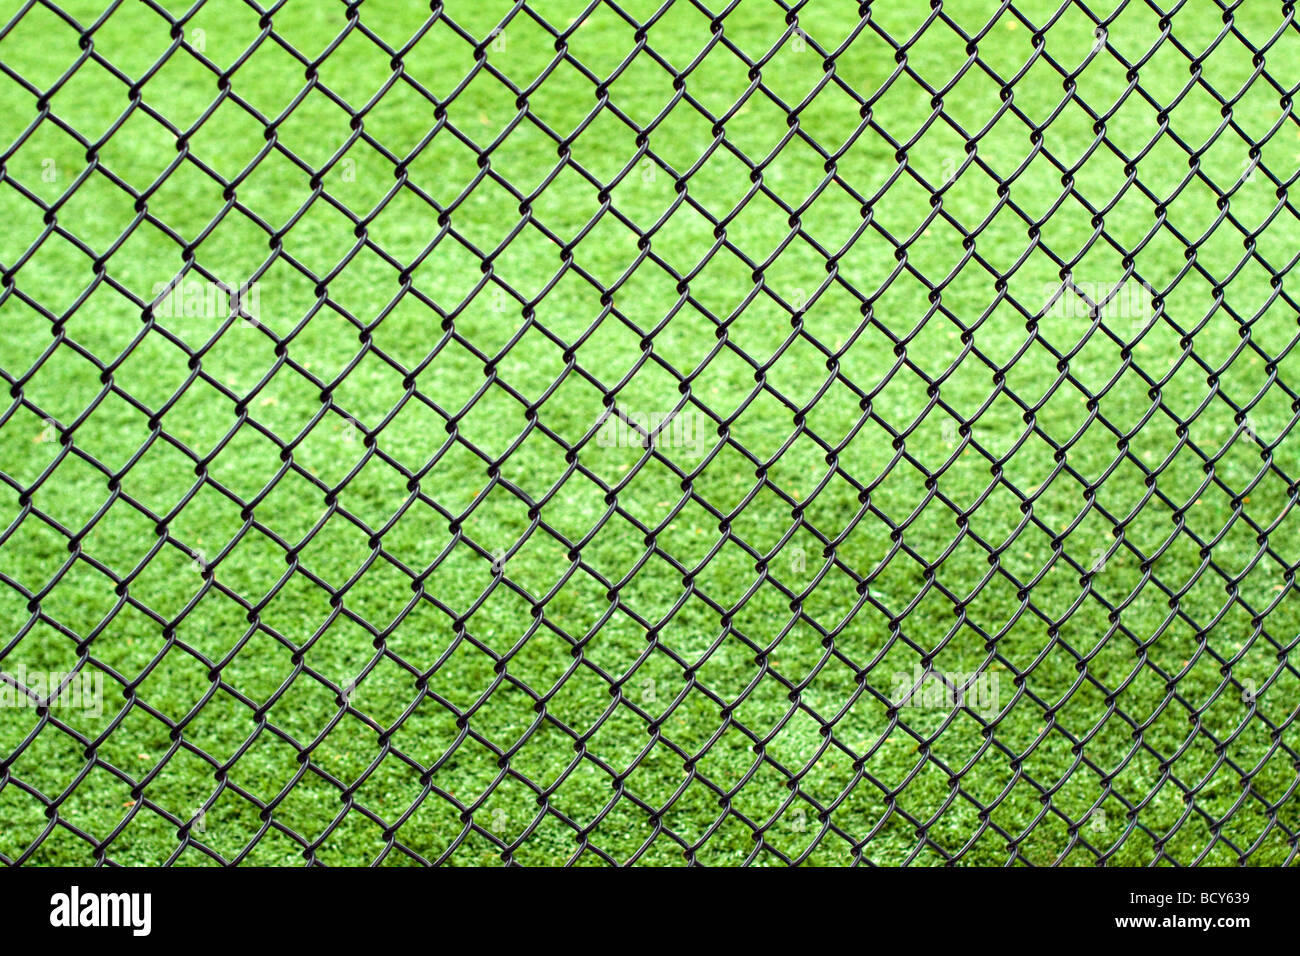 Metal fence, green gras in background. Stock Photo